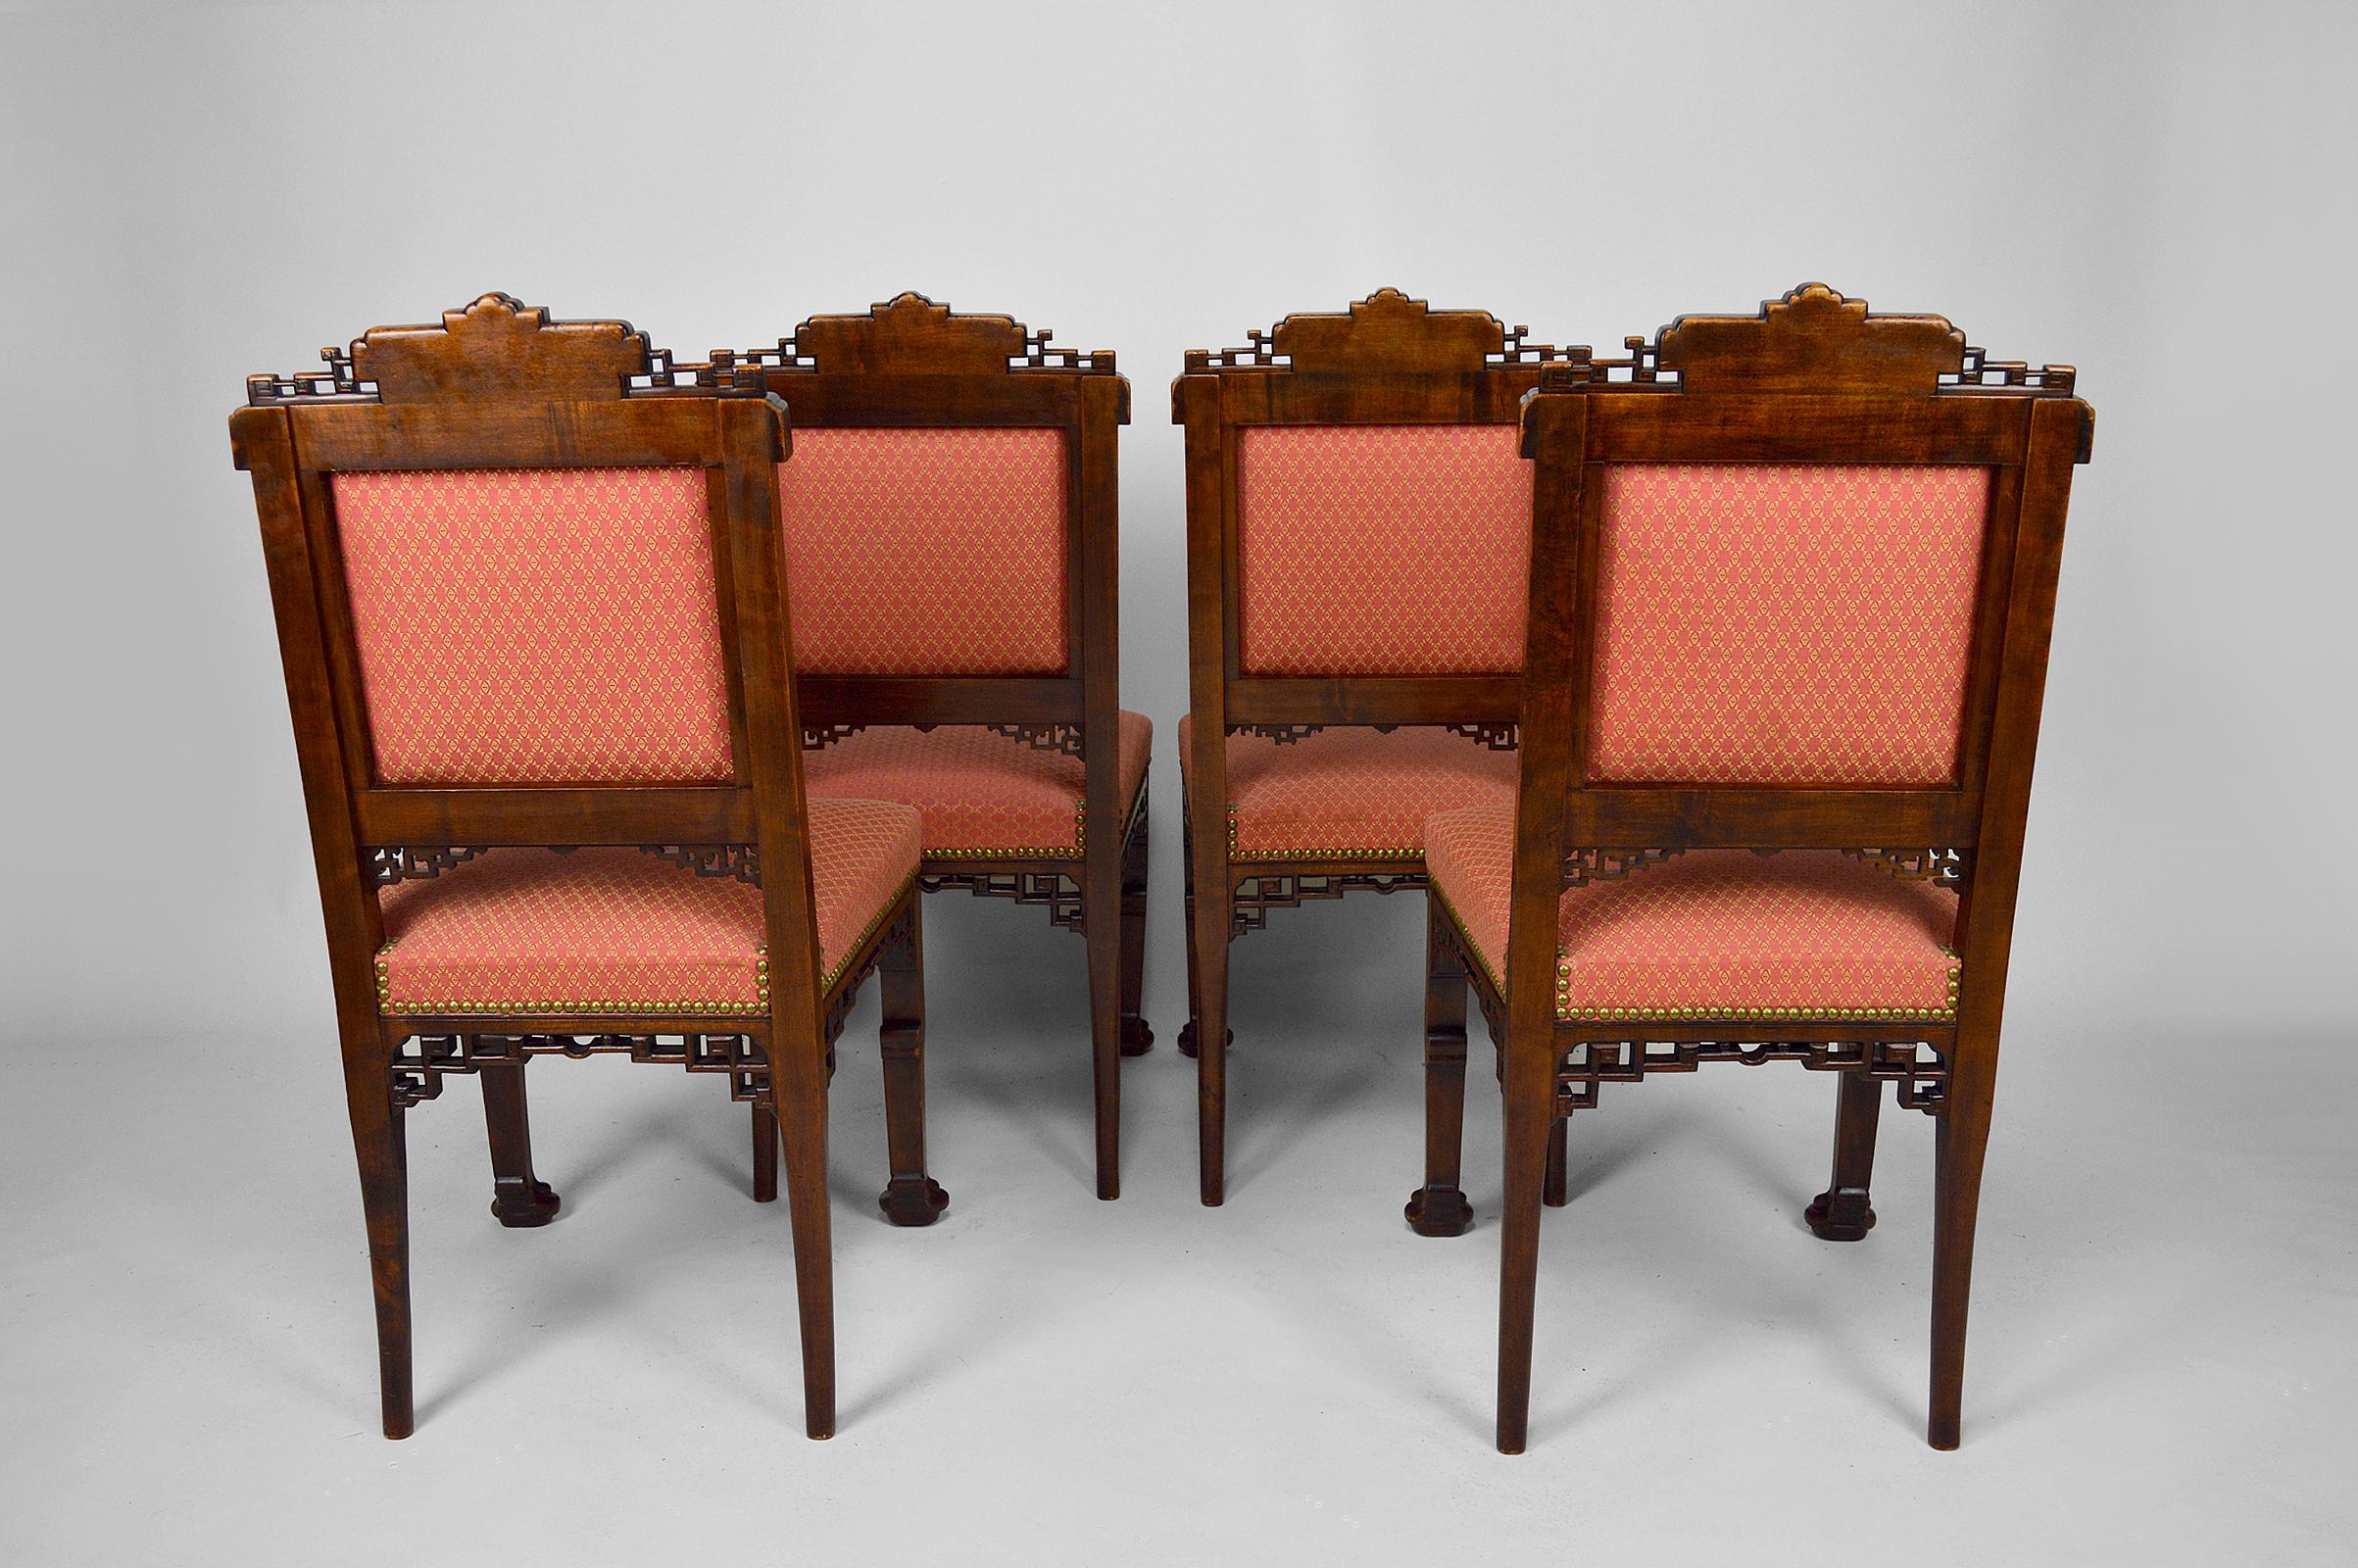 Japonisme Japanese Chairs attributed to Gabriel Viardot, France, circa 1880, set of 4 For Sale